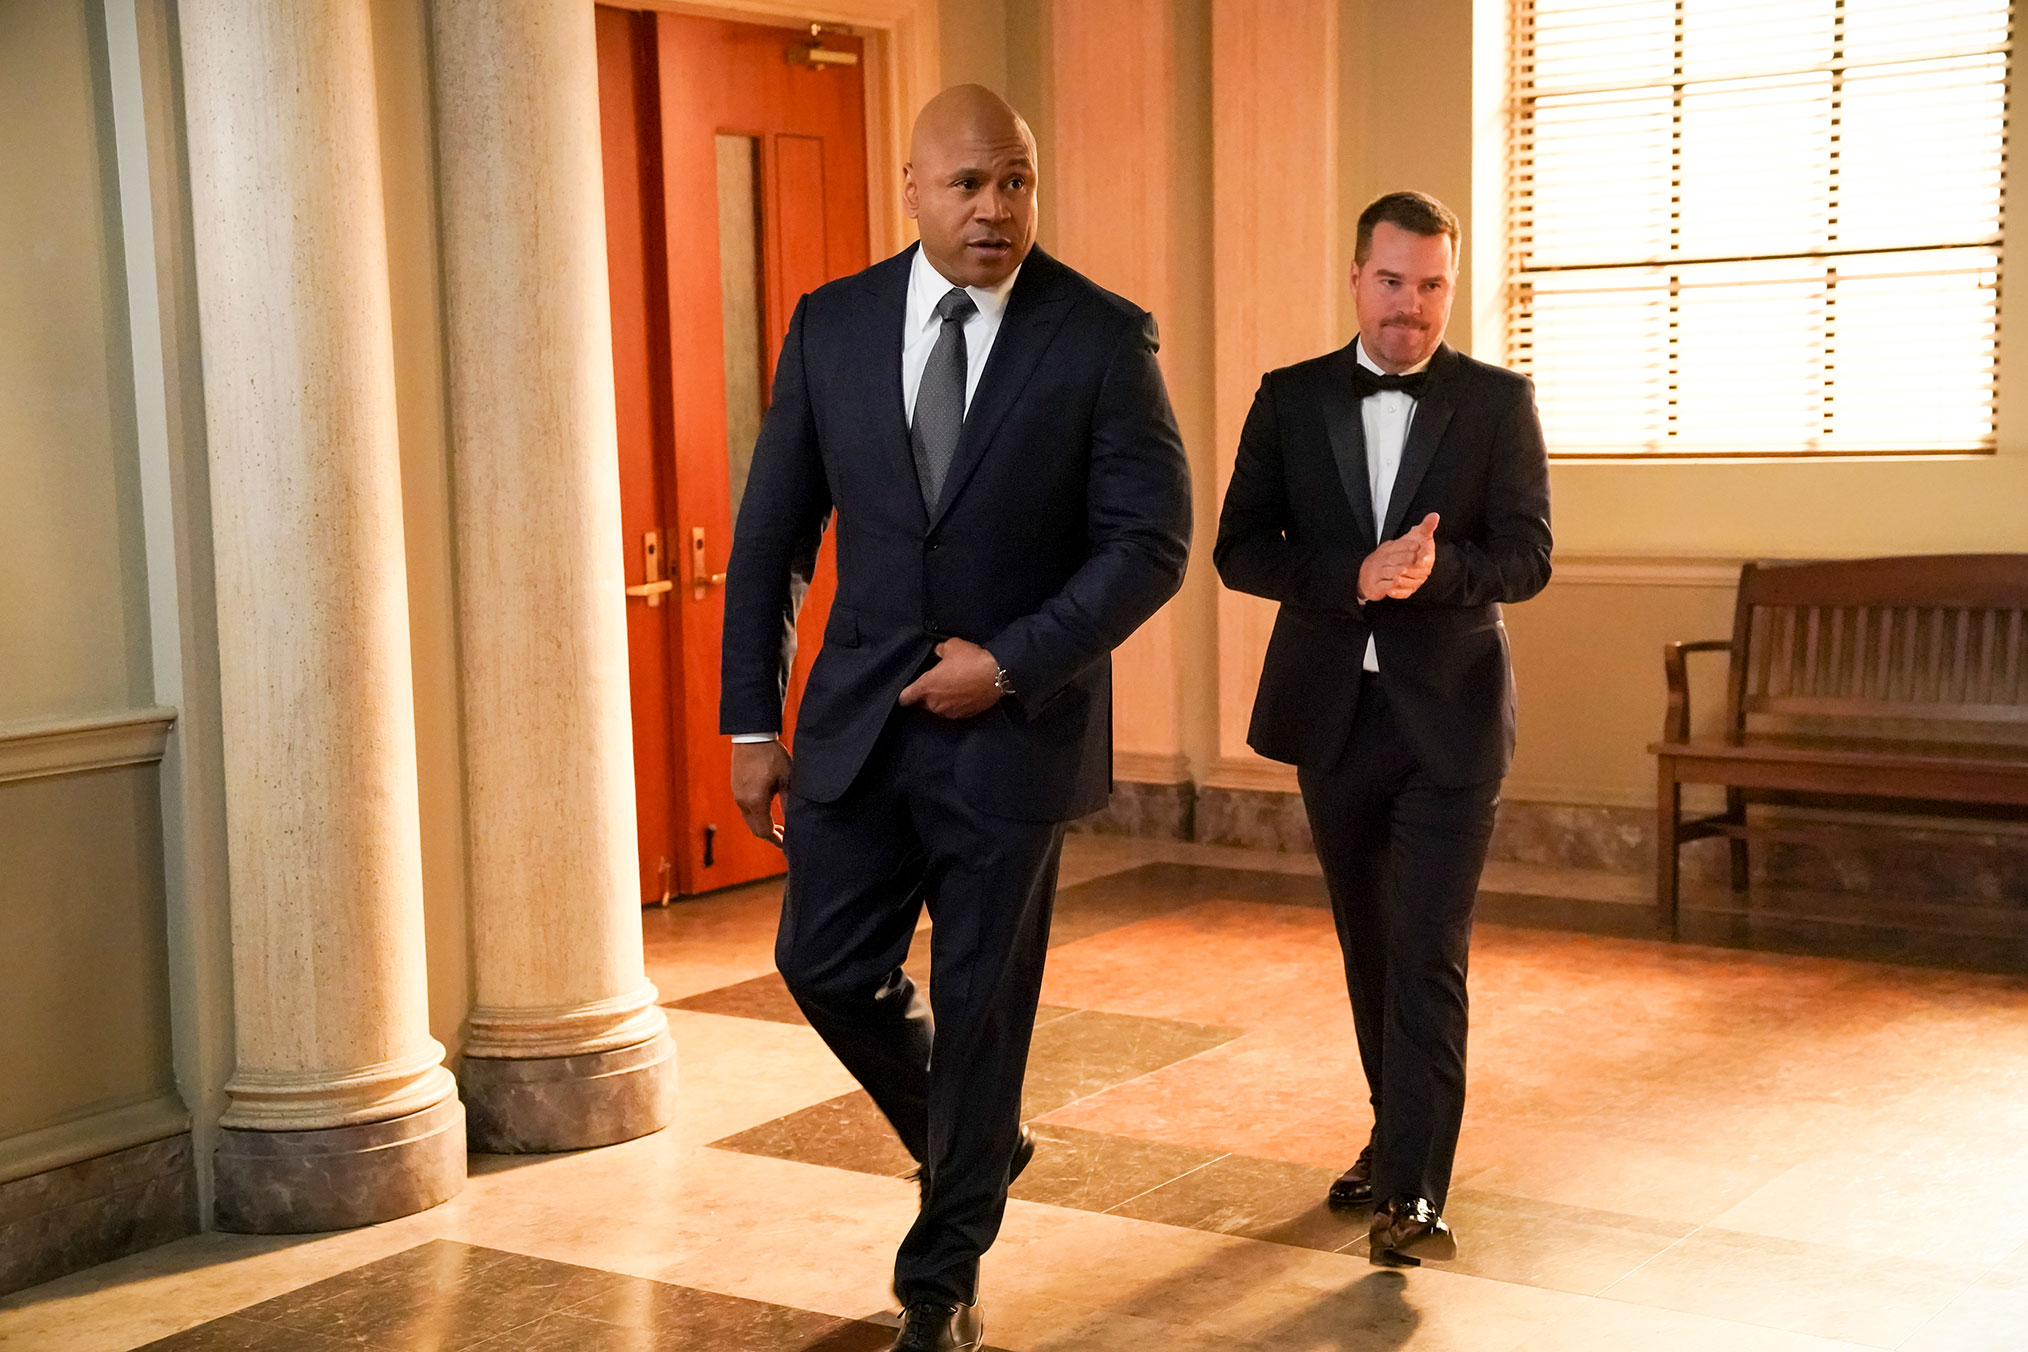 LL Cool J and Chris O'Donnell in 'NCIS'